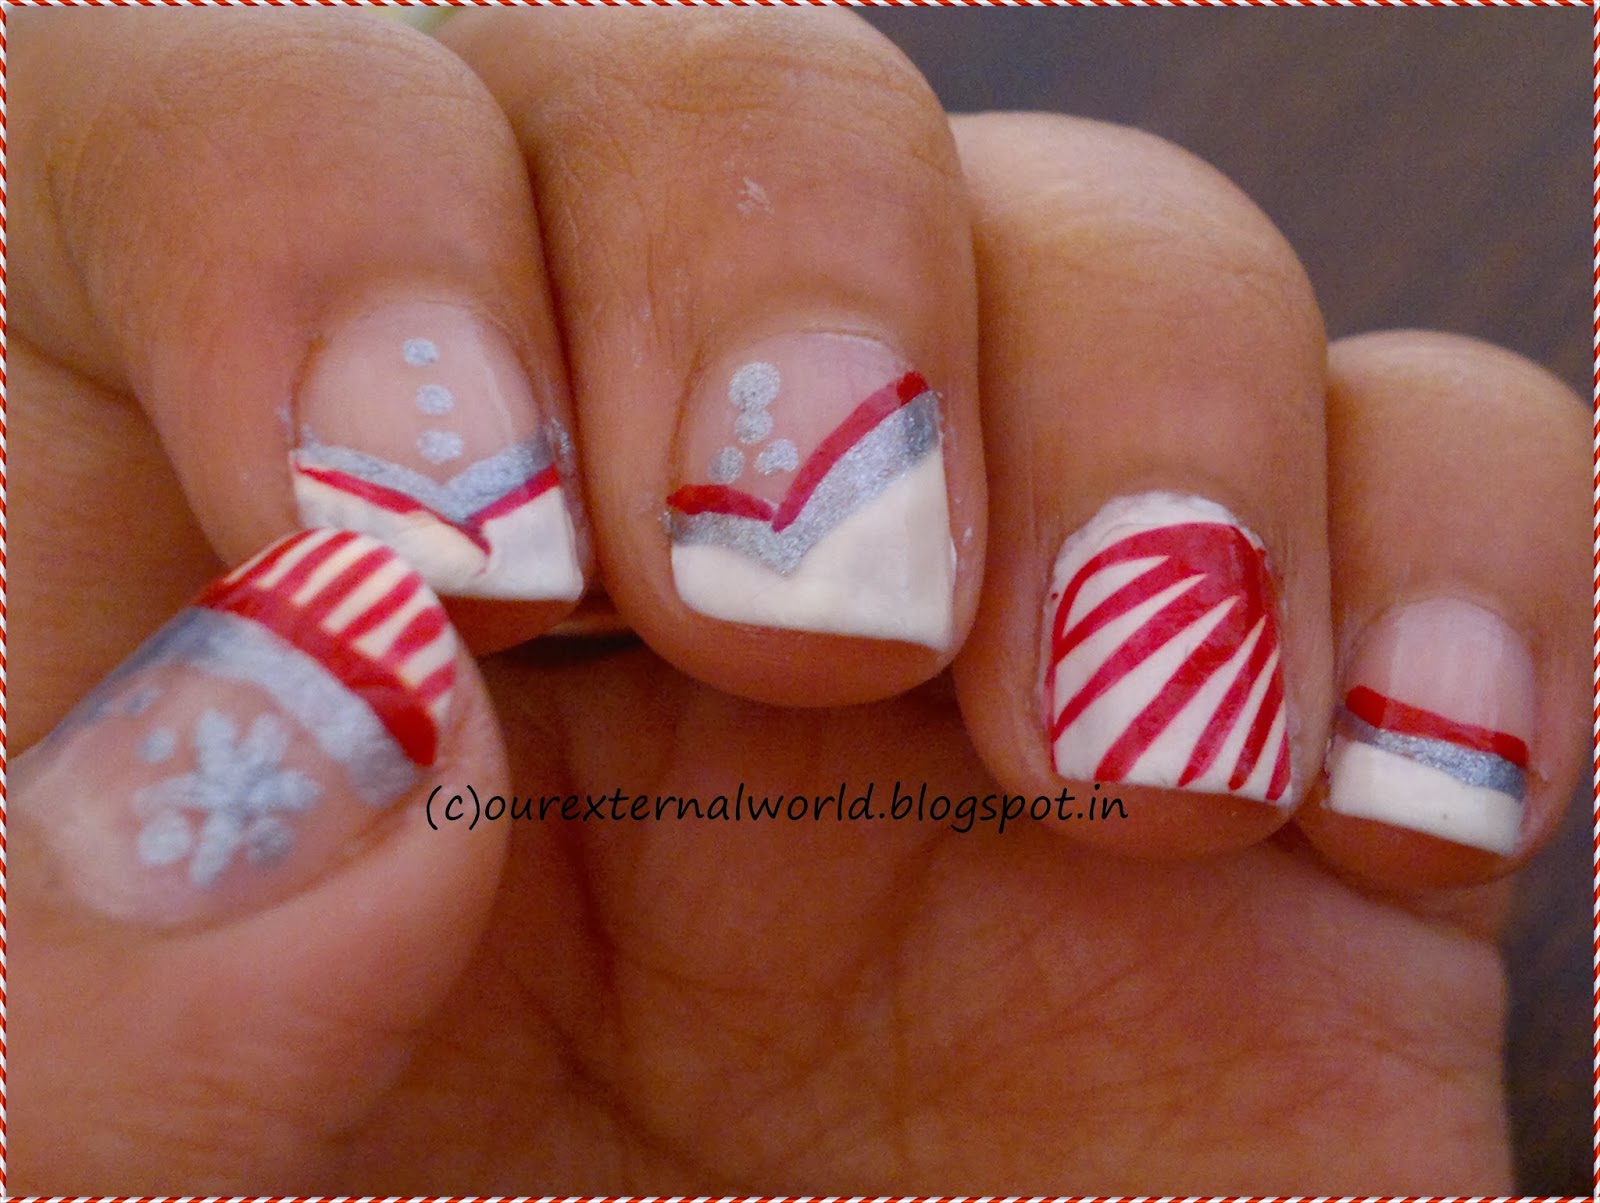 1. Candy Cane Nail Art Designs for Christmas - wide 4